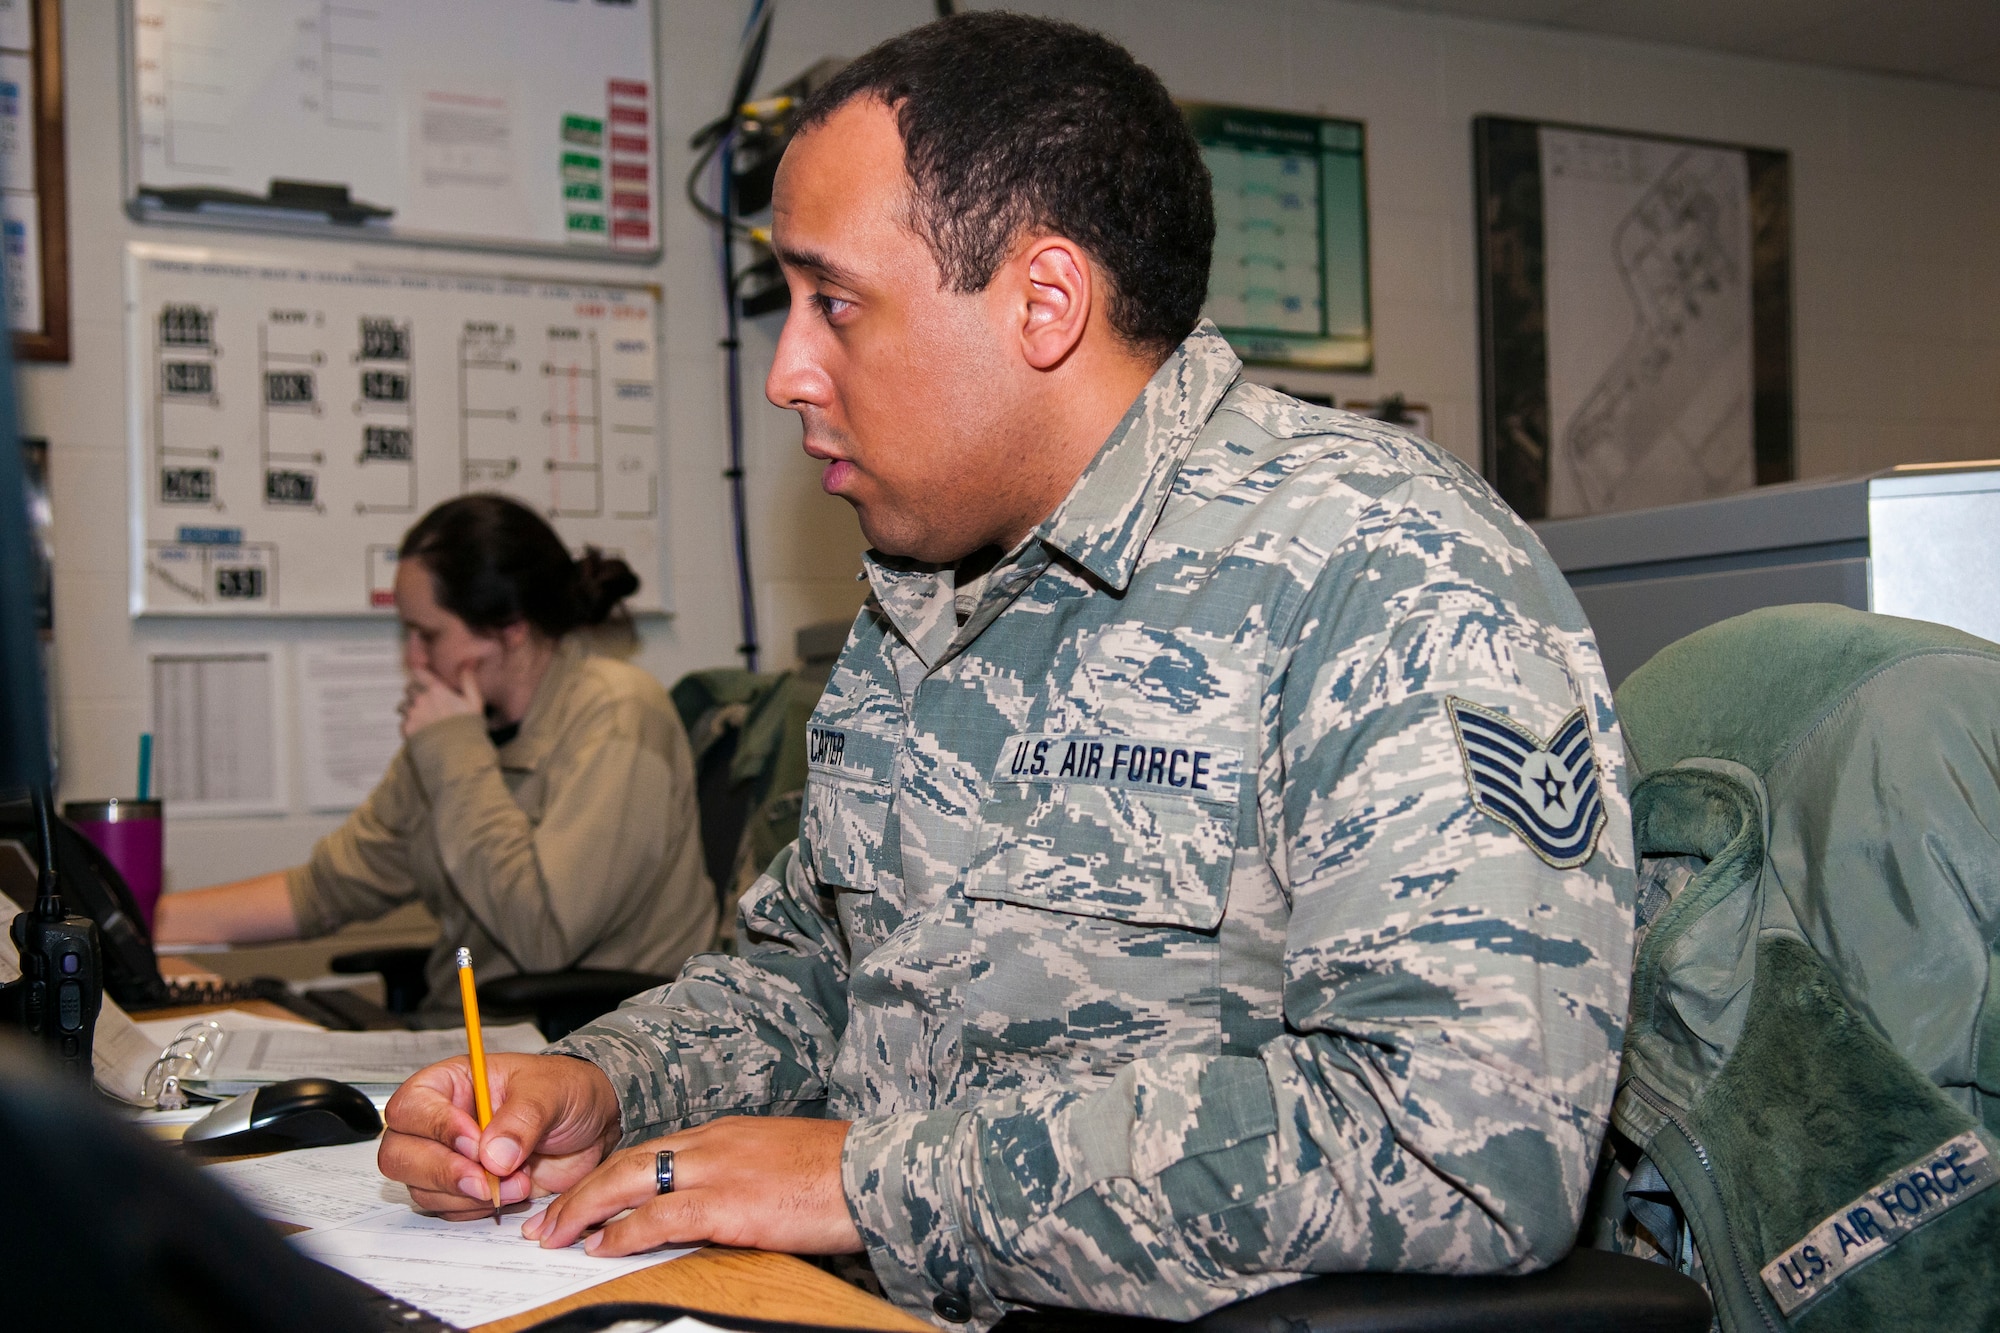 Airman taking notes on a desk with classroom in the background